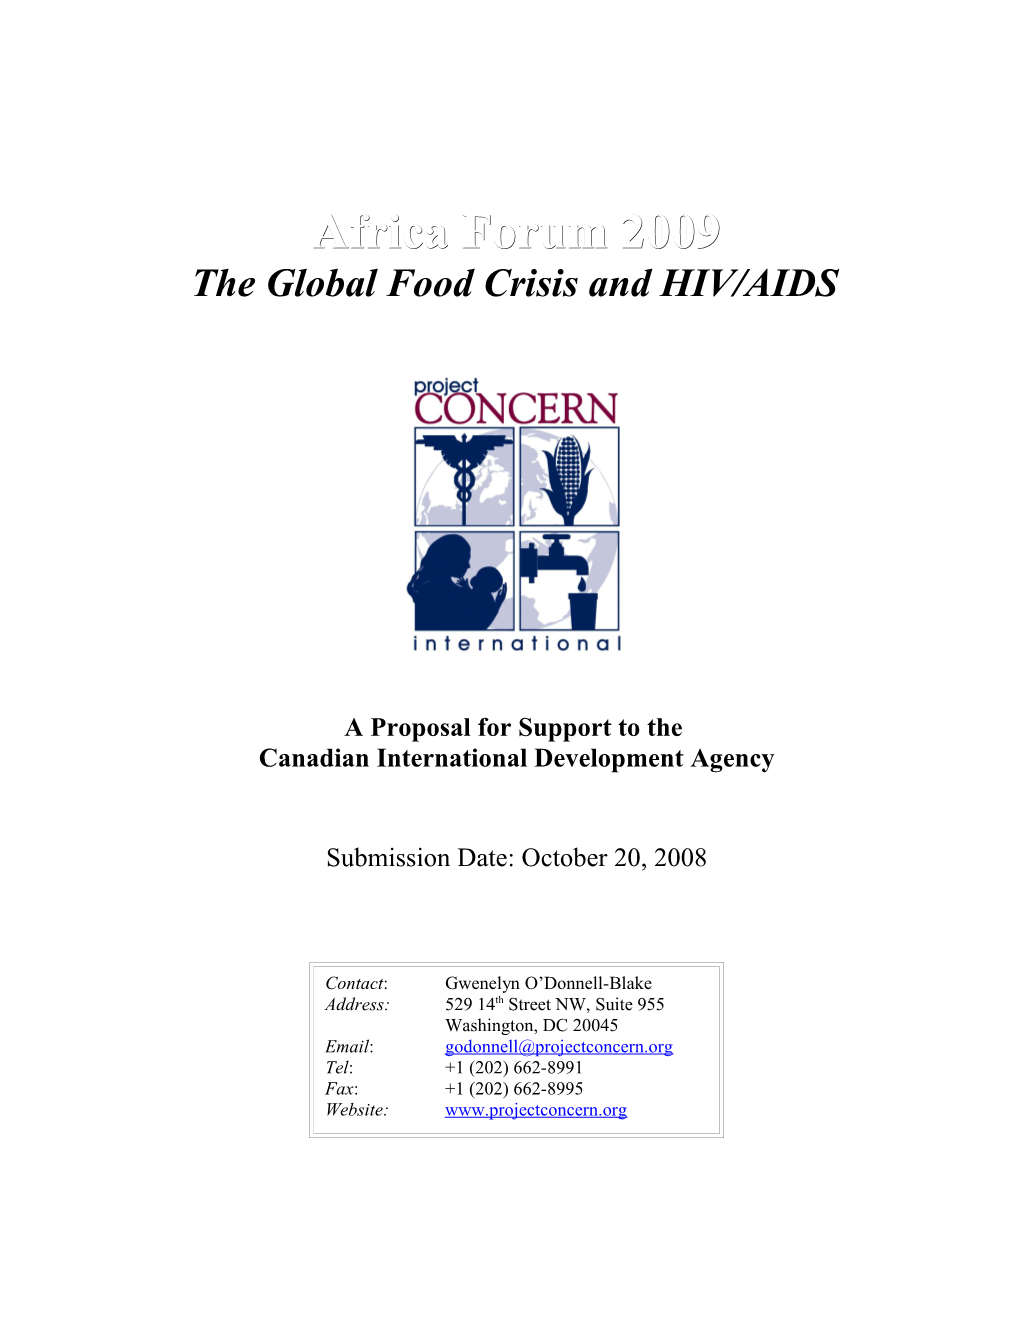 The Global Food Crisis and HIV/AIDS